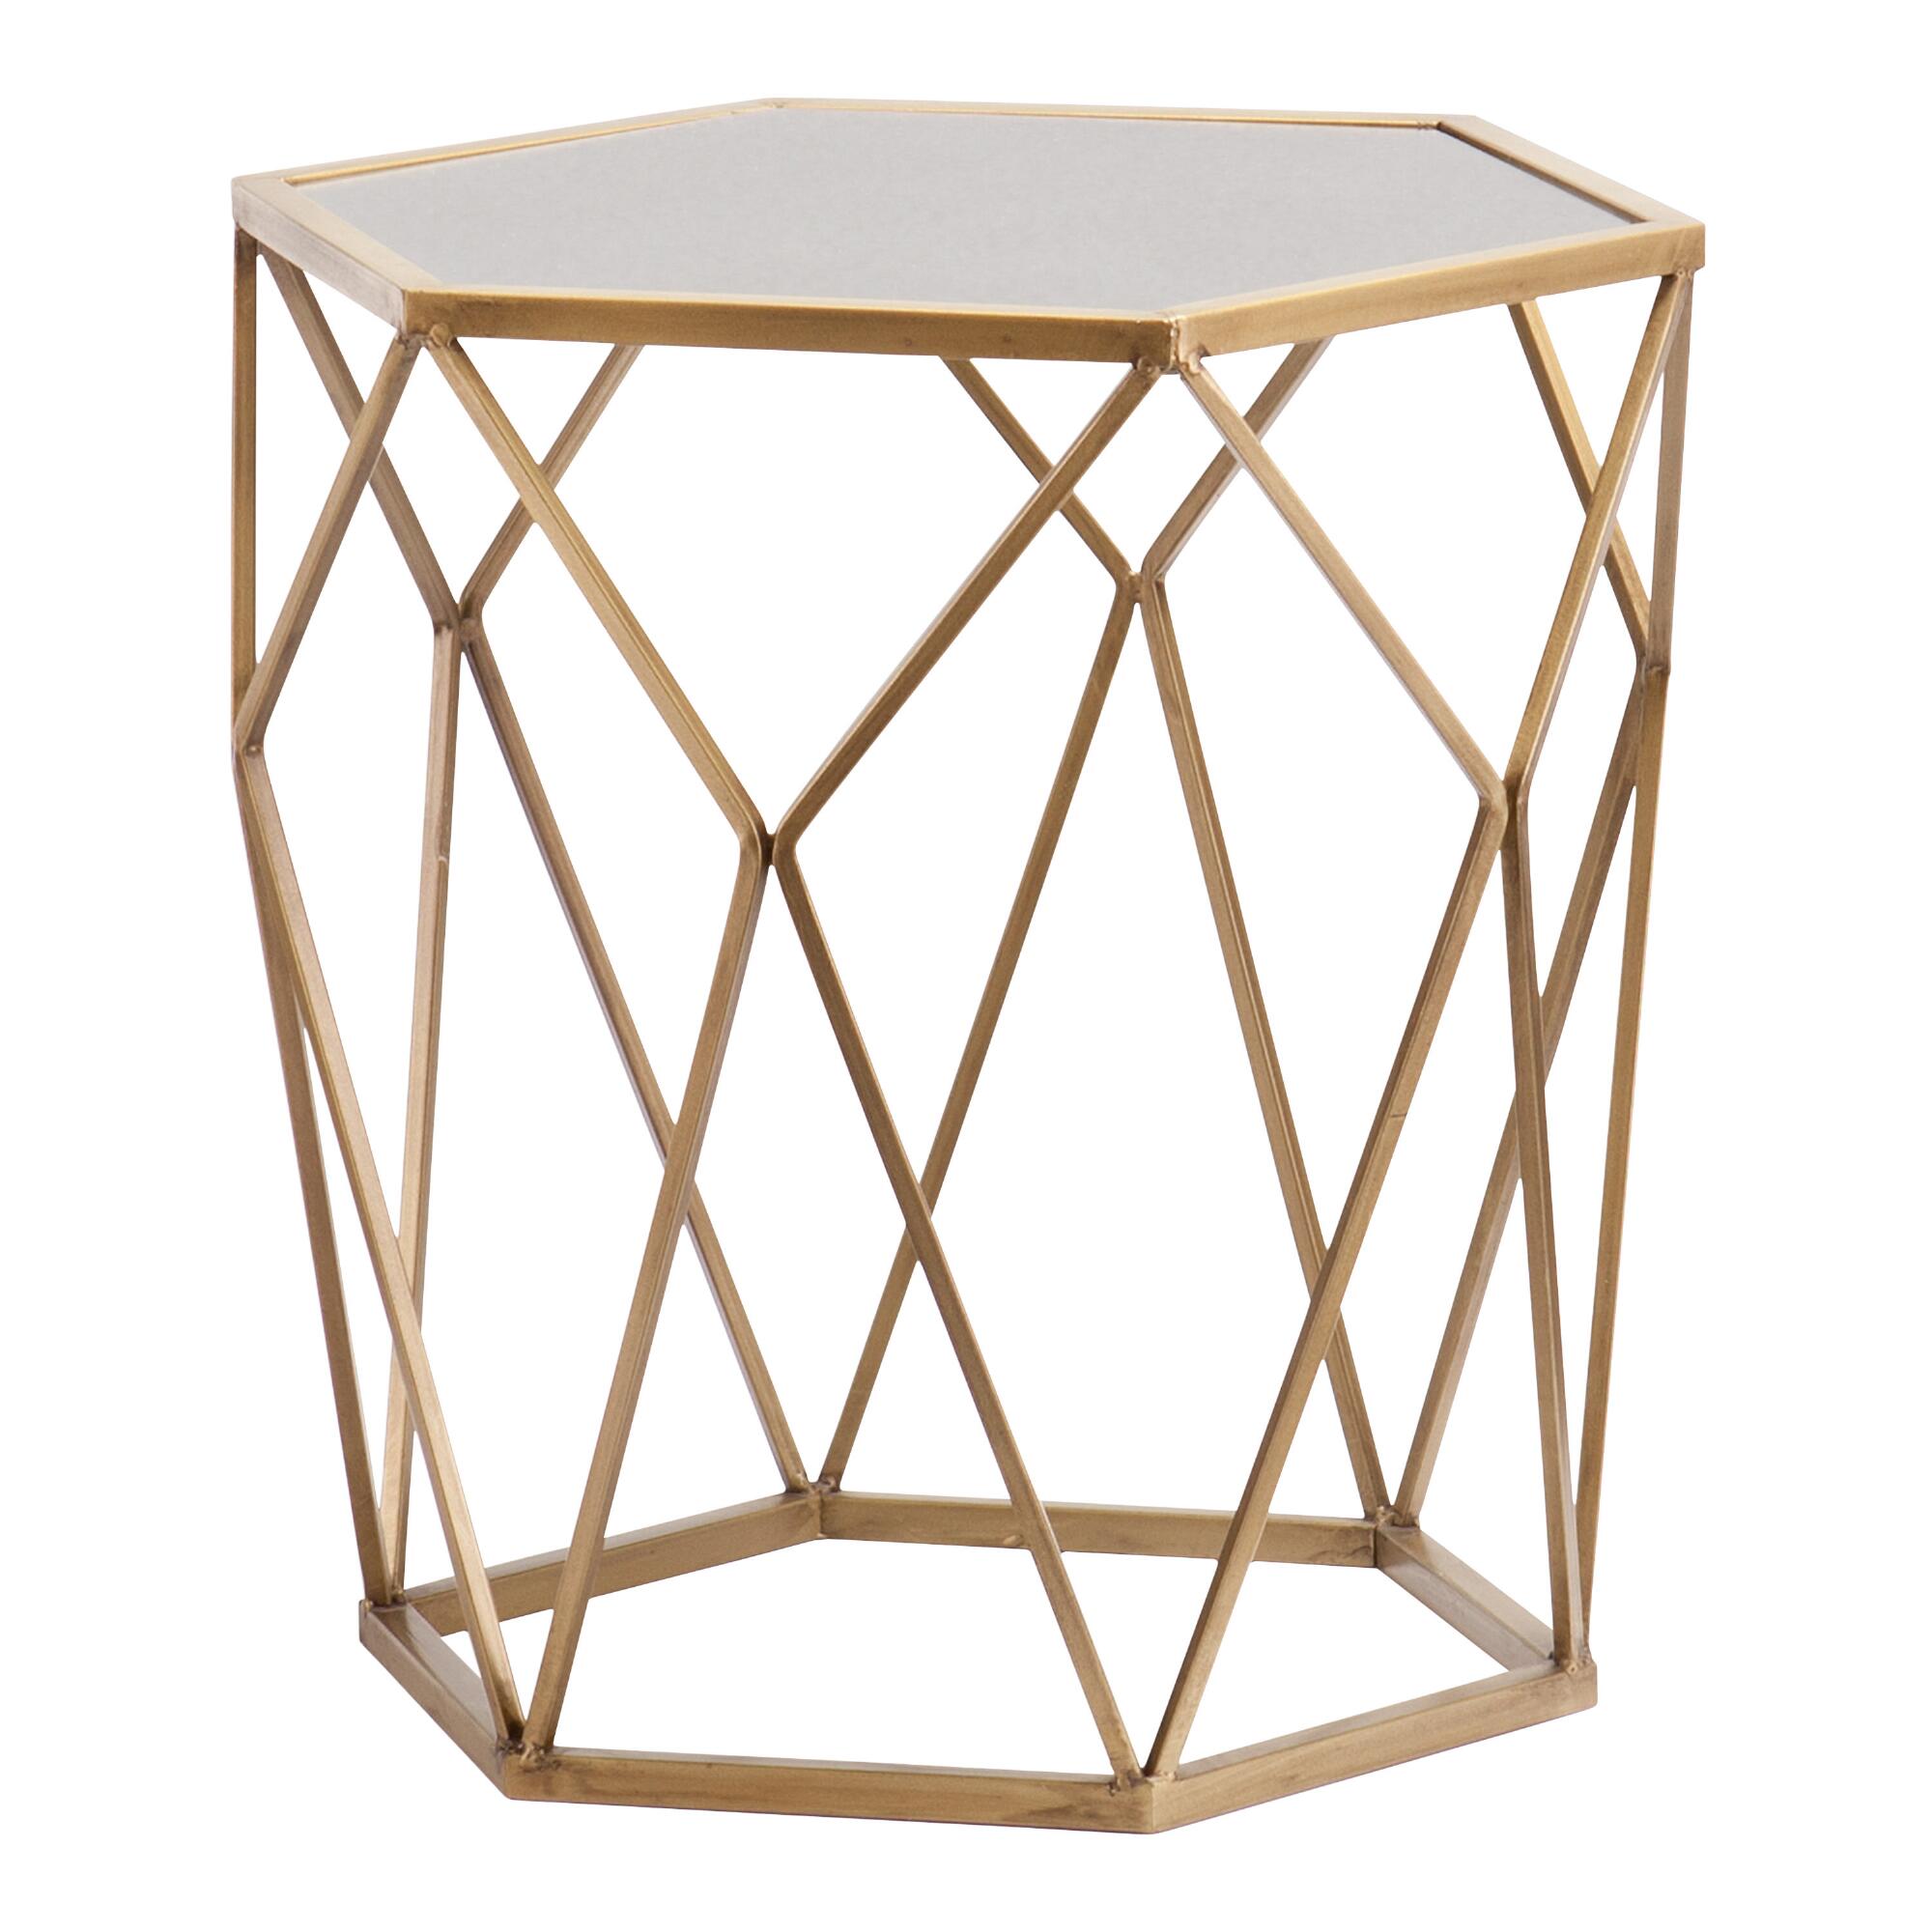 Gold Geometric Mirrored Adair Accent Table by World Market